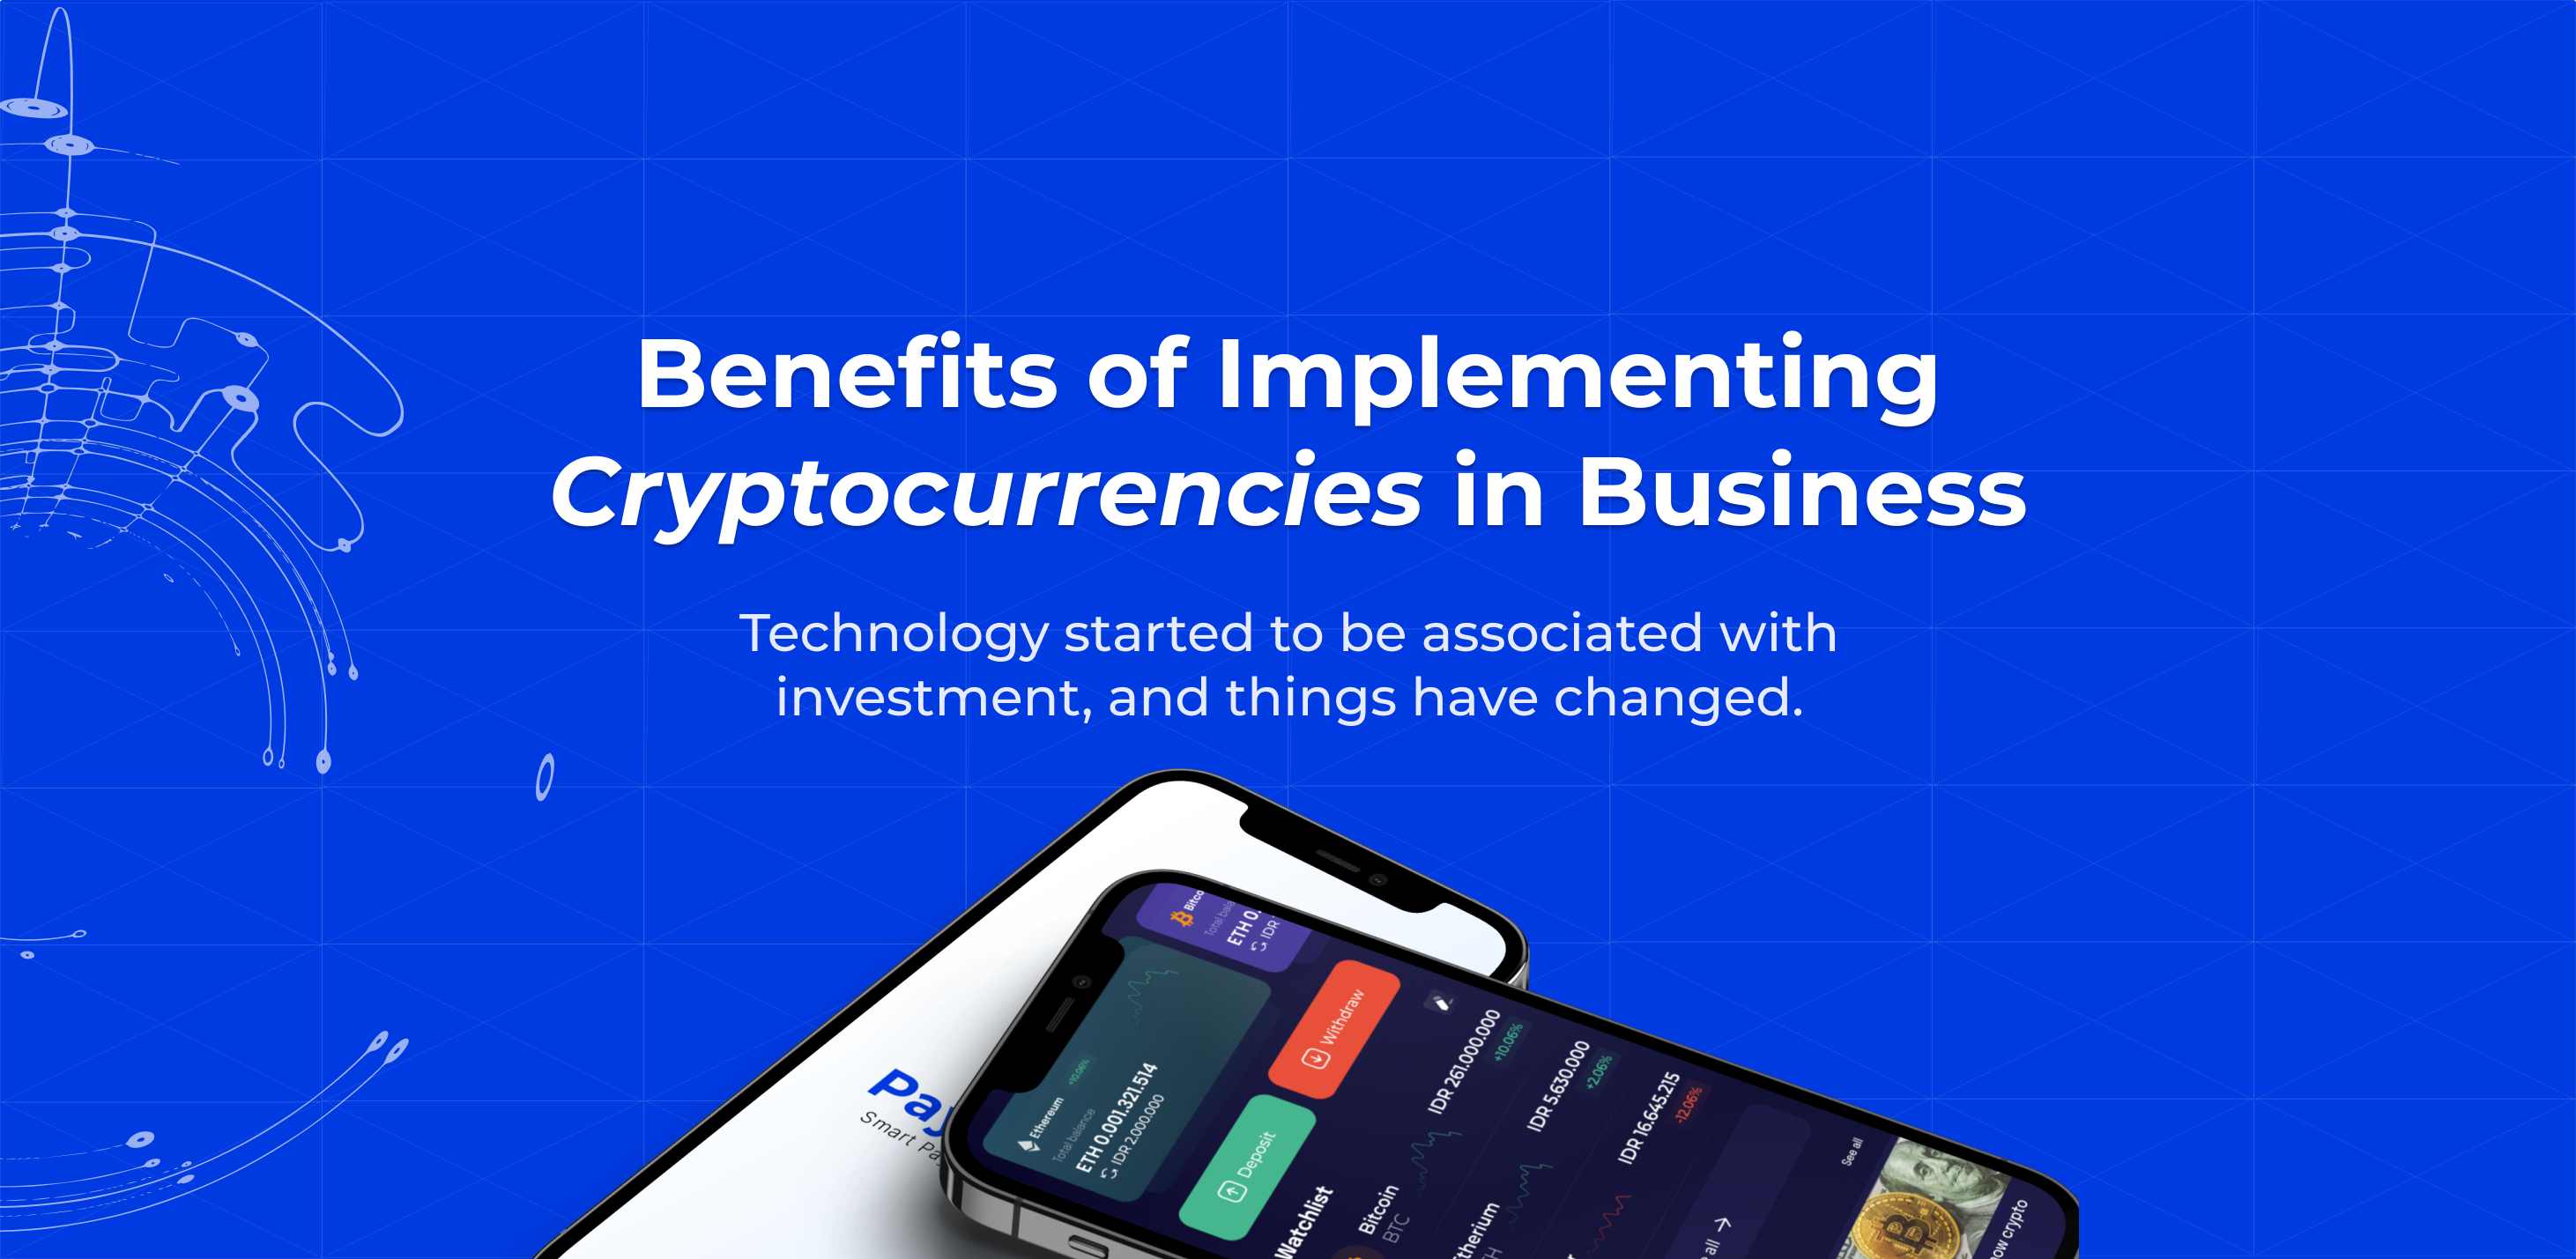 Benefits of Implementing Cryptocurrencies in Business